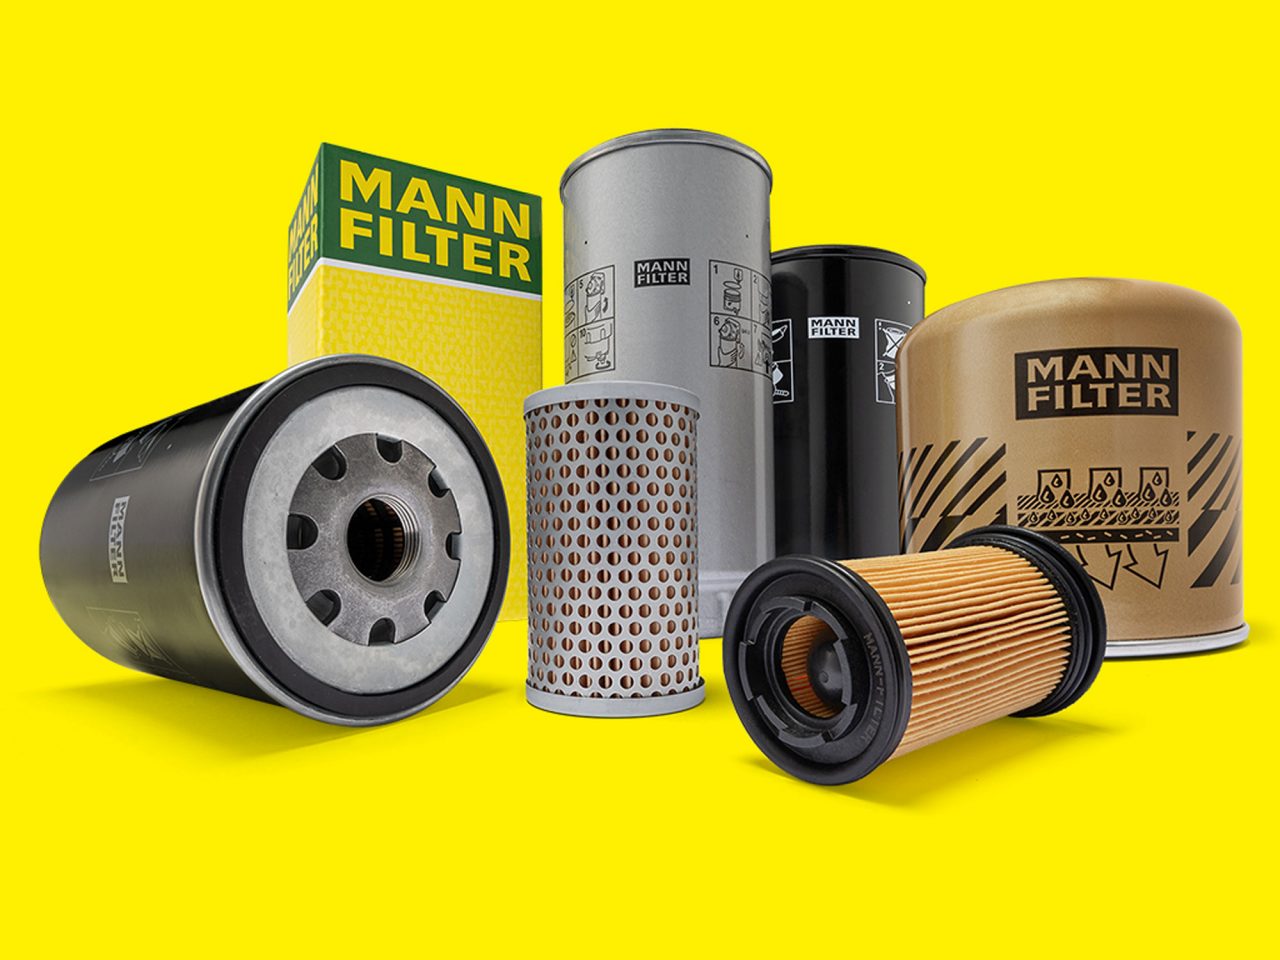 All-round protection with MANN-FILTER